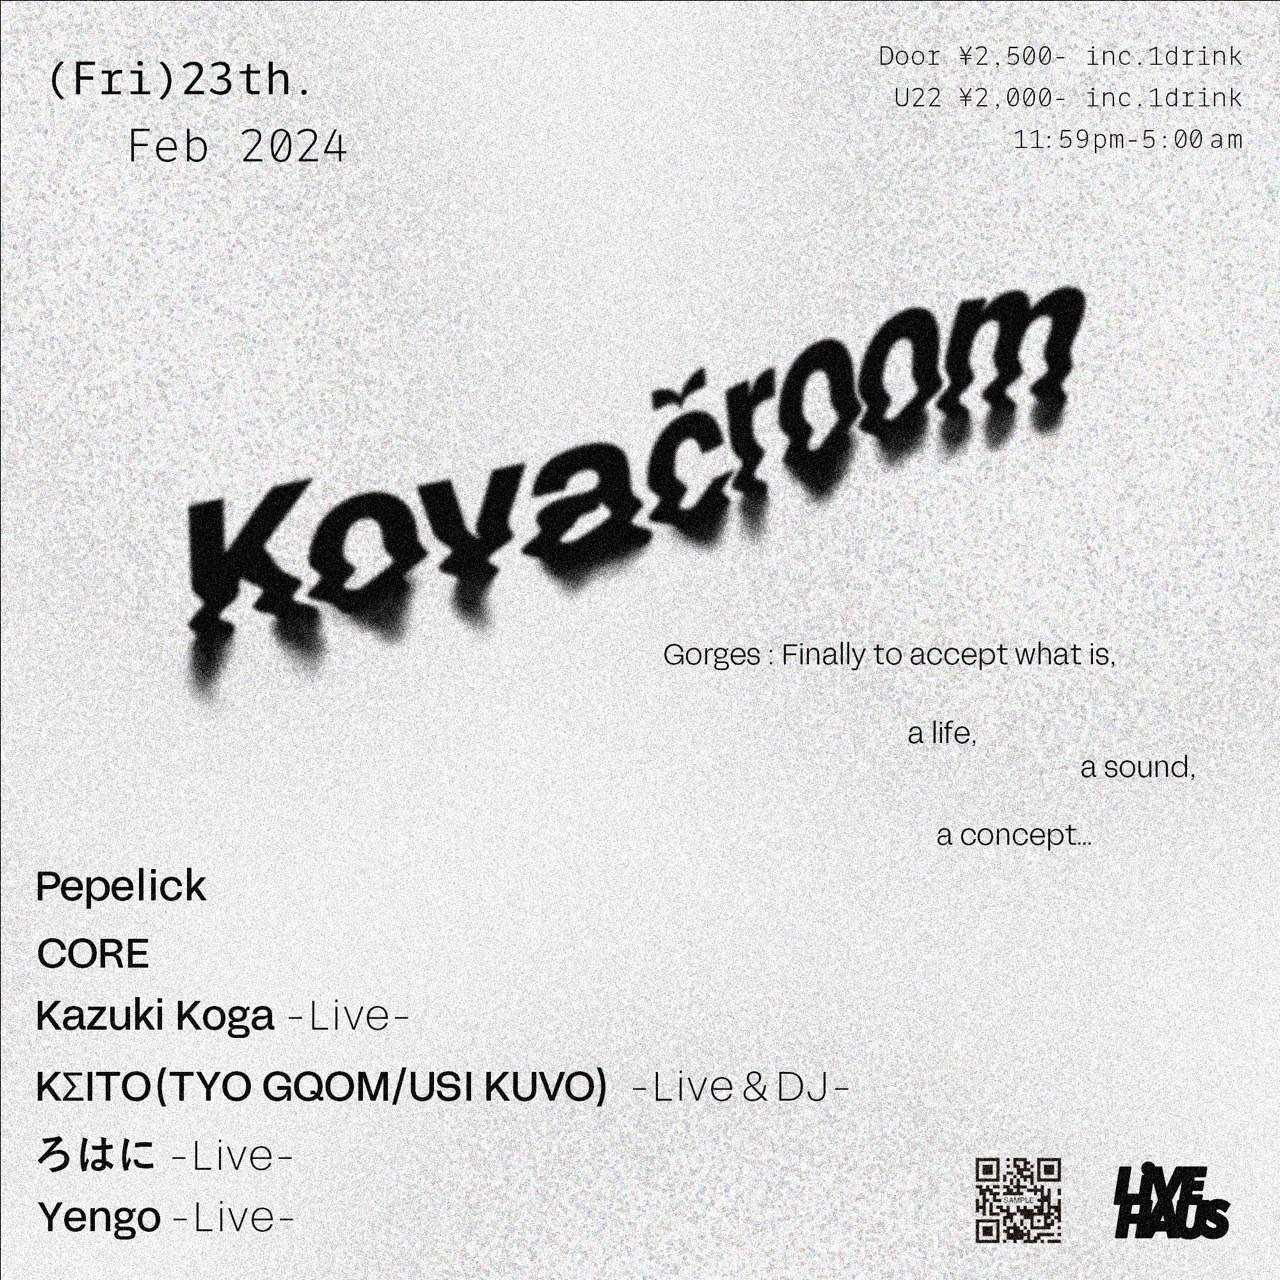 kovačroom -Gorges: Finally to accept what is, a life, a sound, a concept…- - フライヤー表